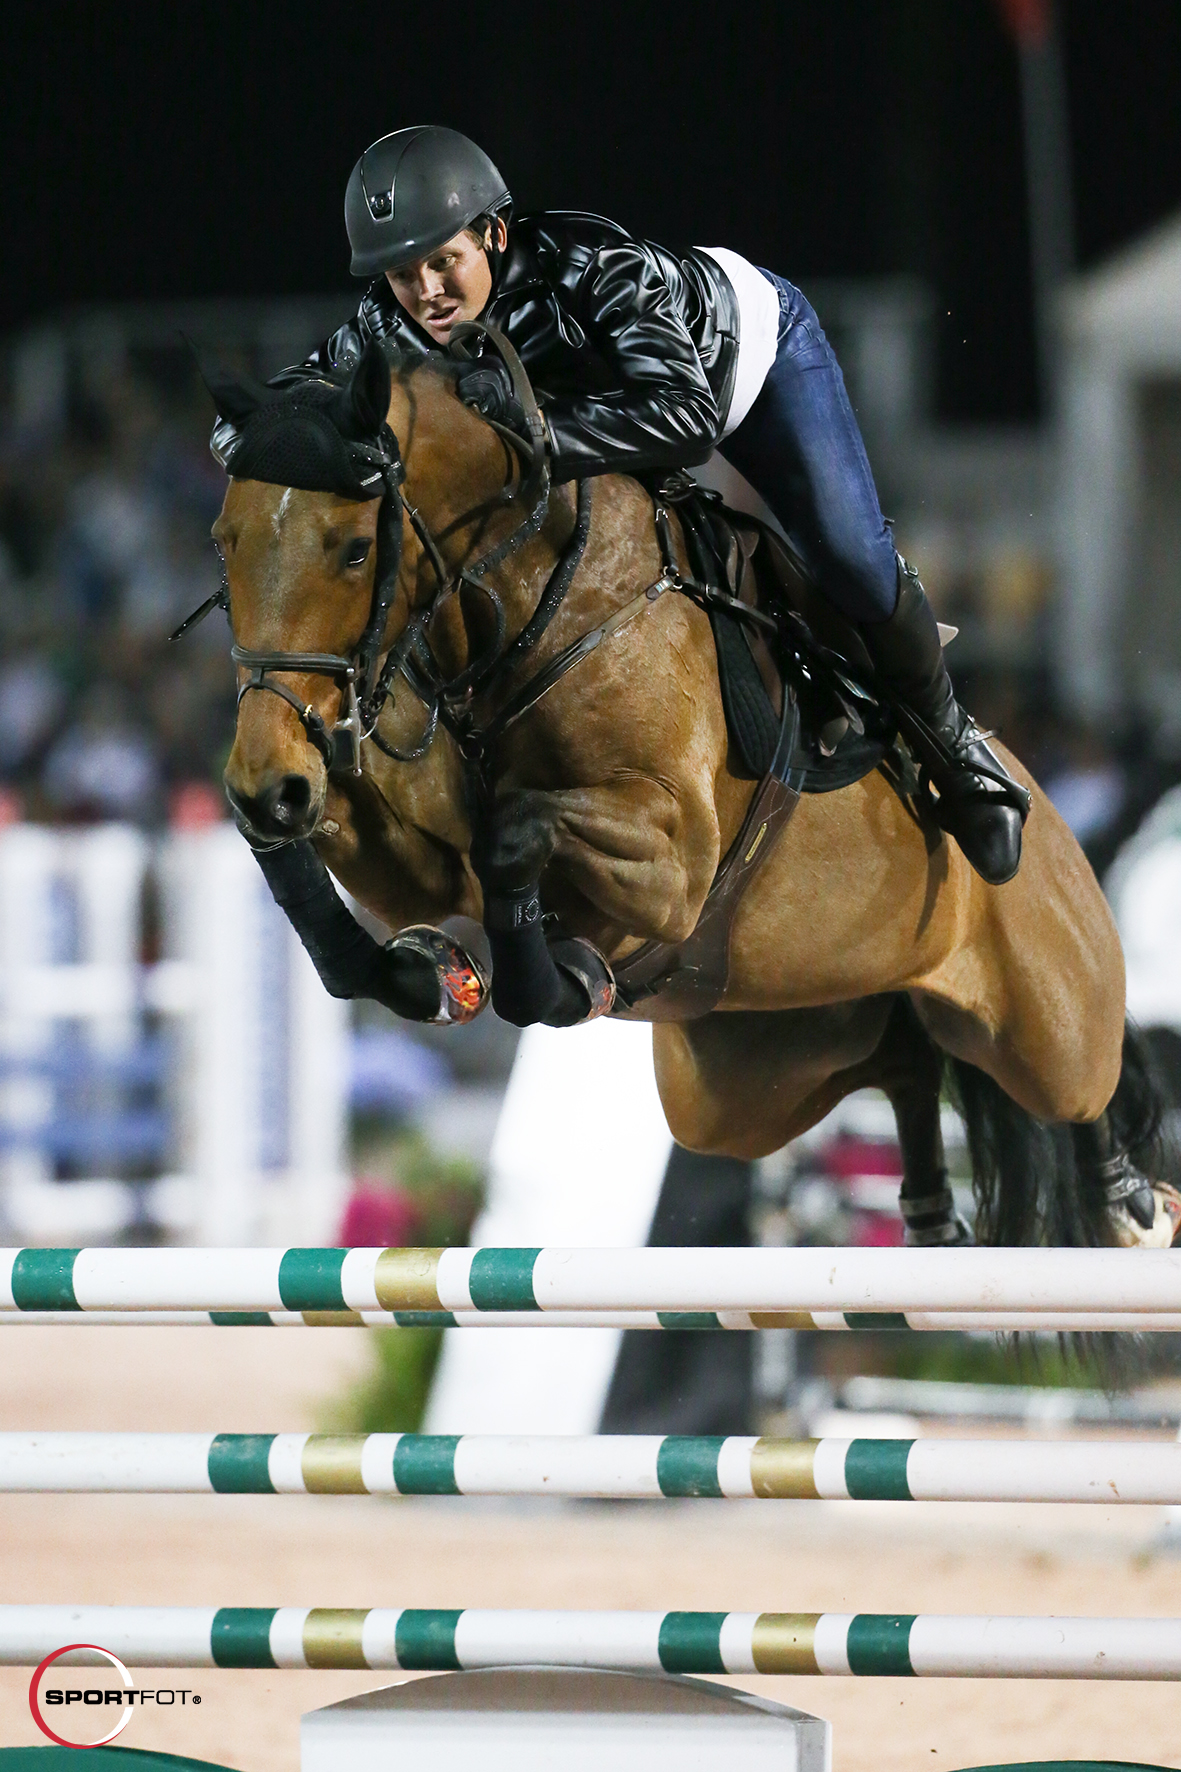 Shane Sweetnam and Catch a Star HHS GCC 298_9279 Sportfot